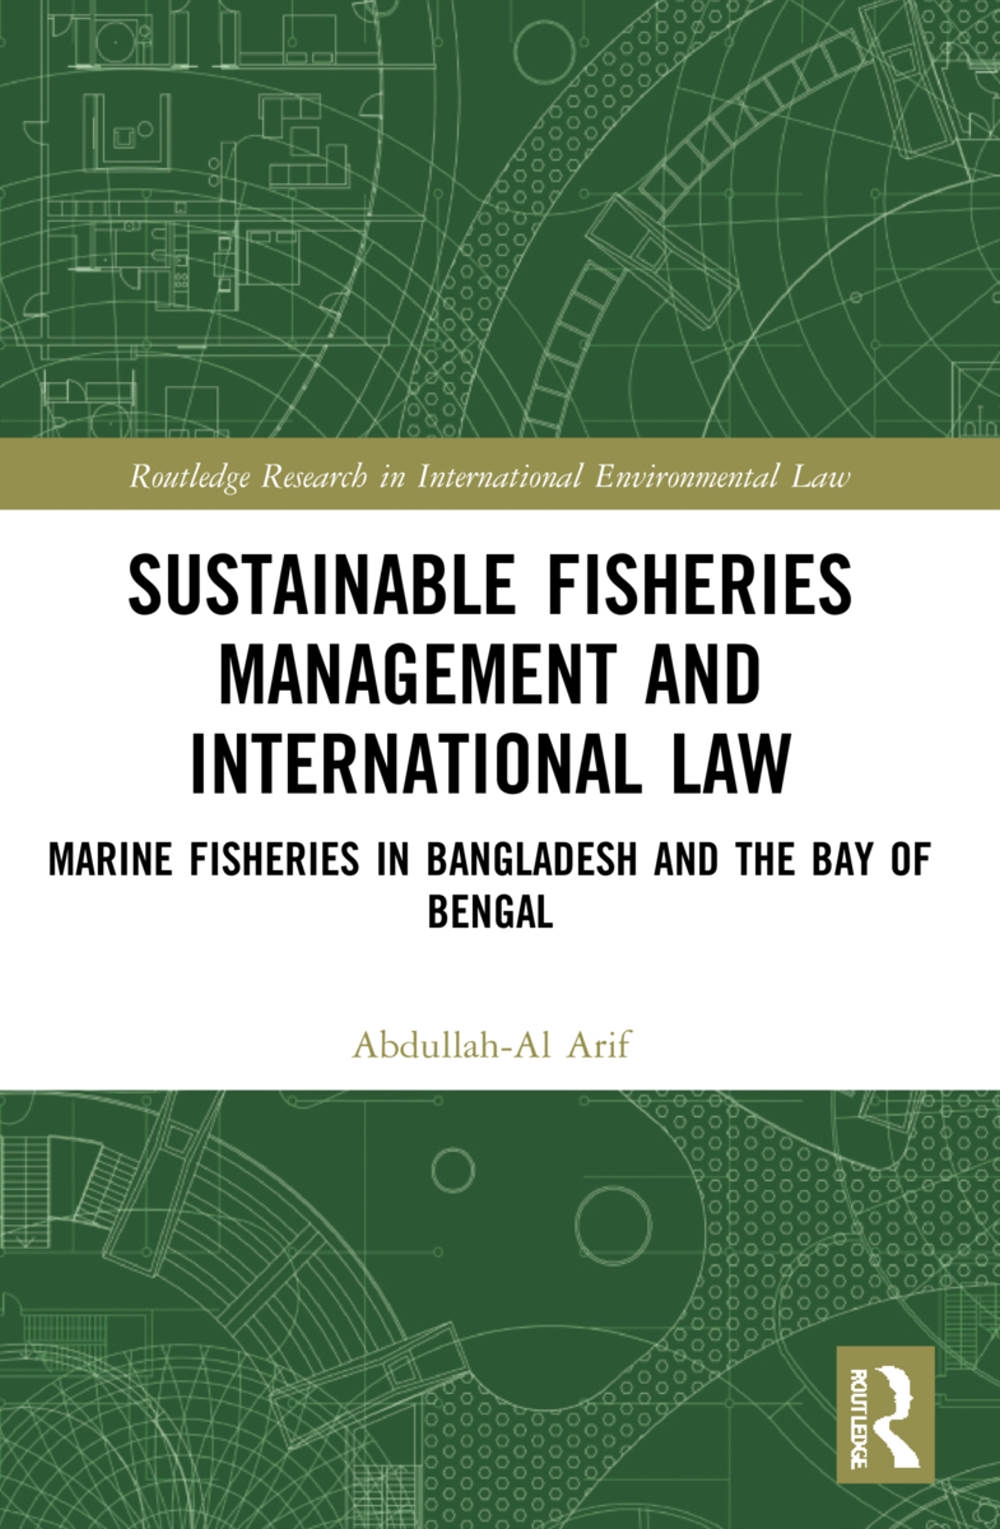 Sustainable Fisheries Management and International Law: Marine Fisheries in Bangladesh and the Bay of Bengal